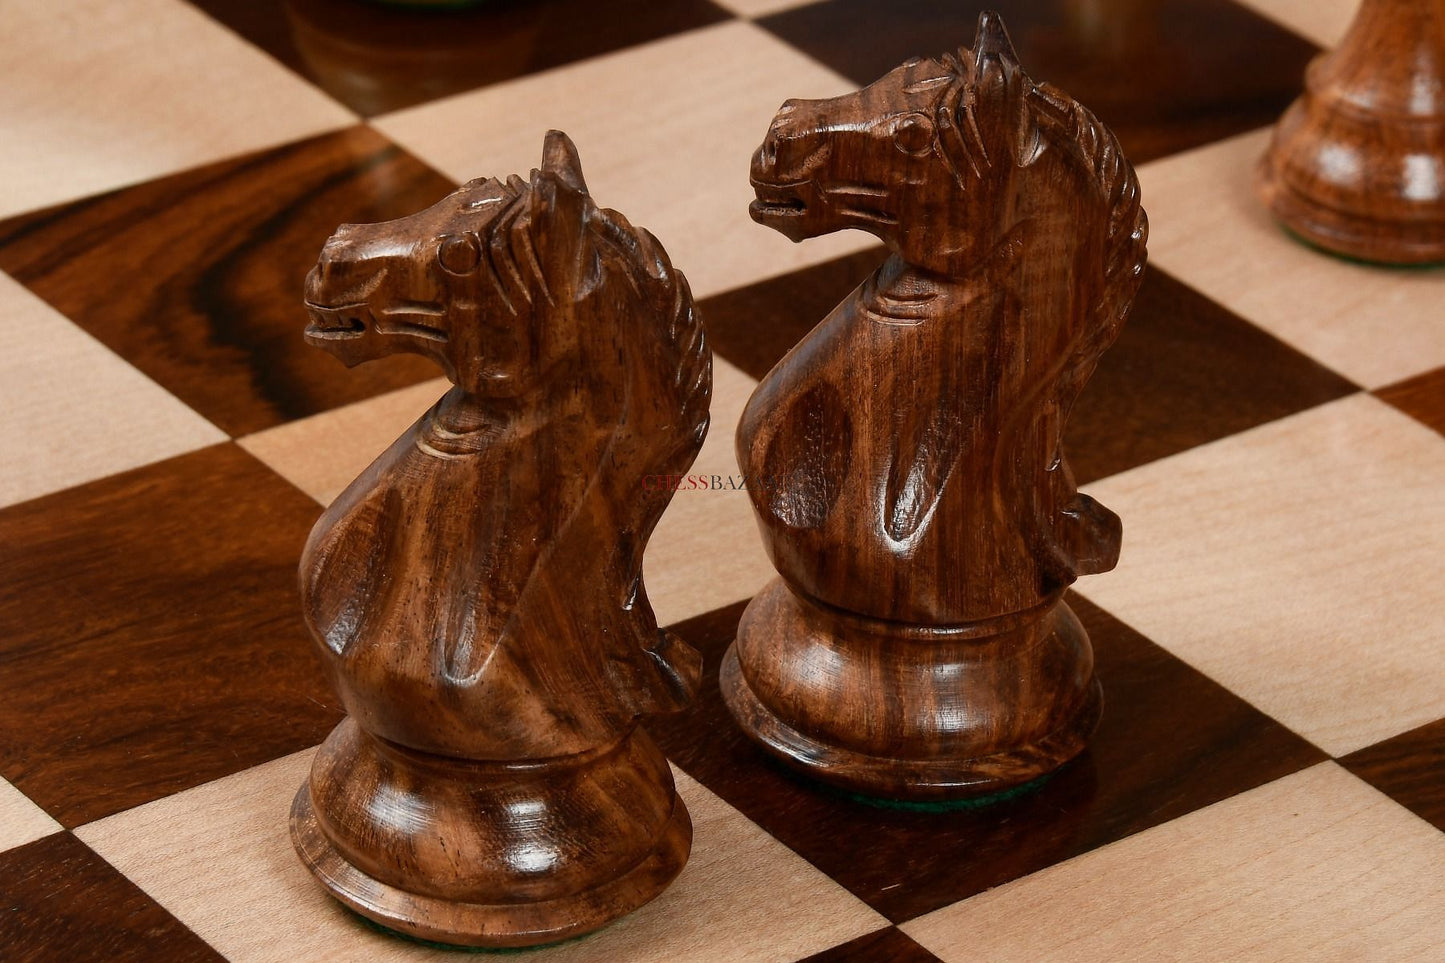 The Fierce Knight Staunton Wooden Chess Pieces in Sheesham & Box Wood - 4.0" King